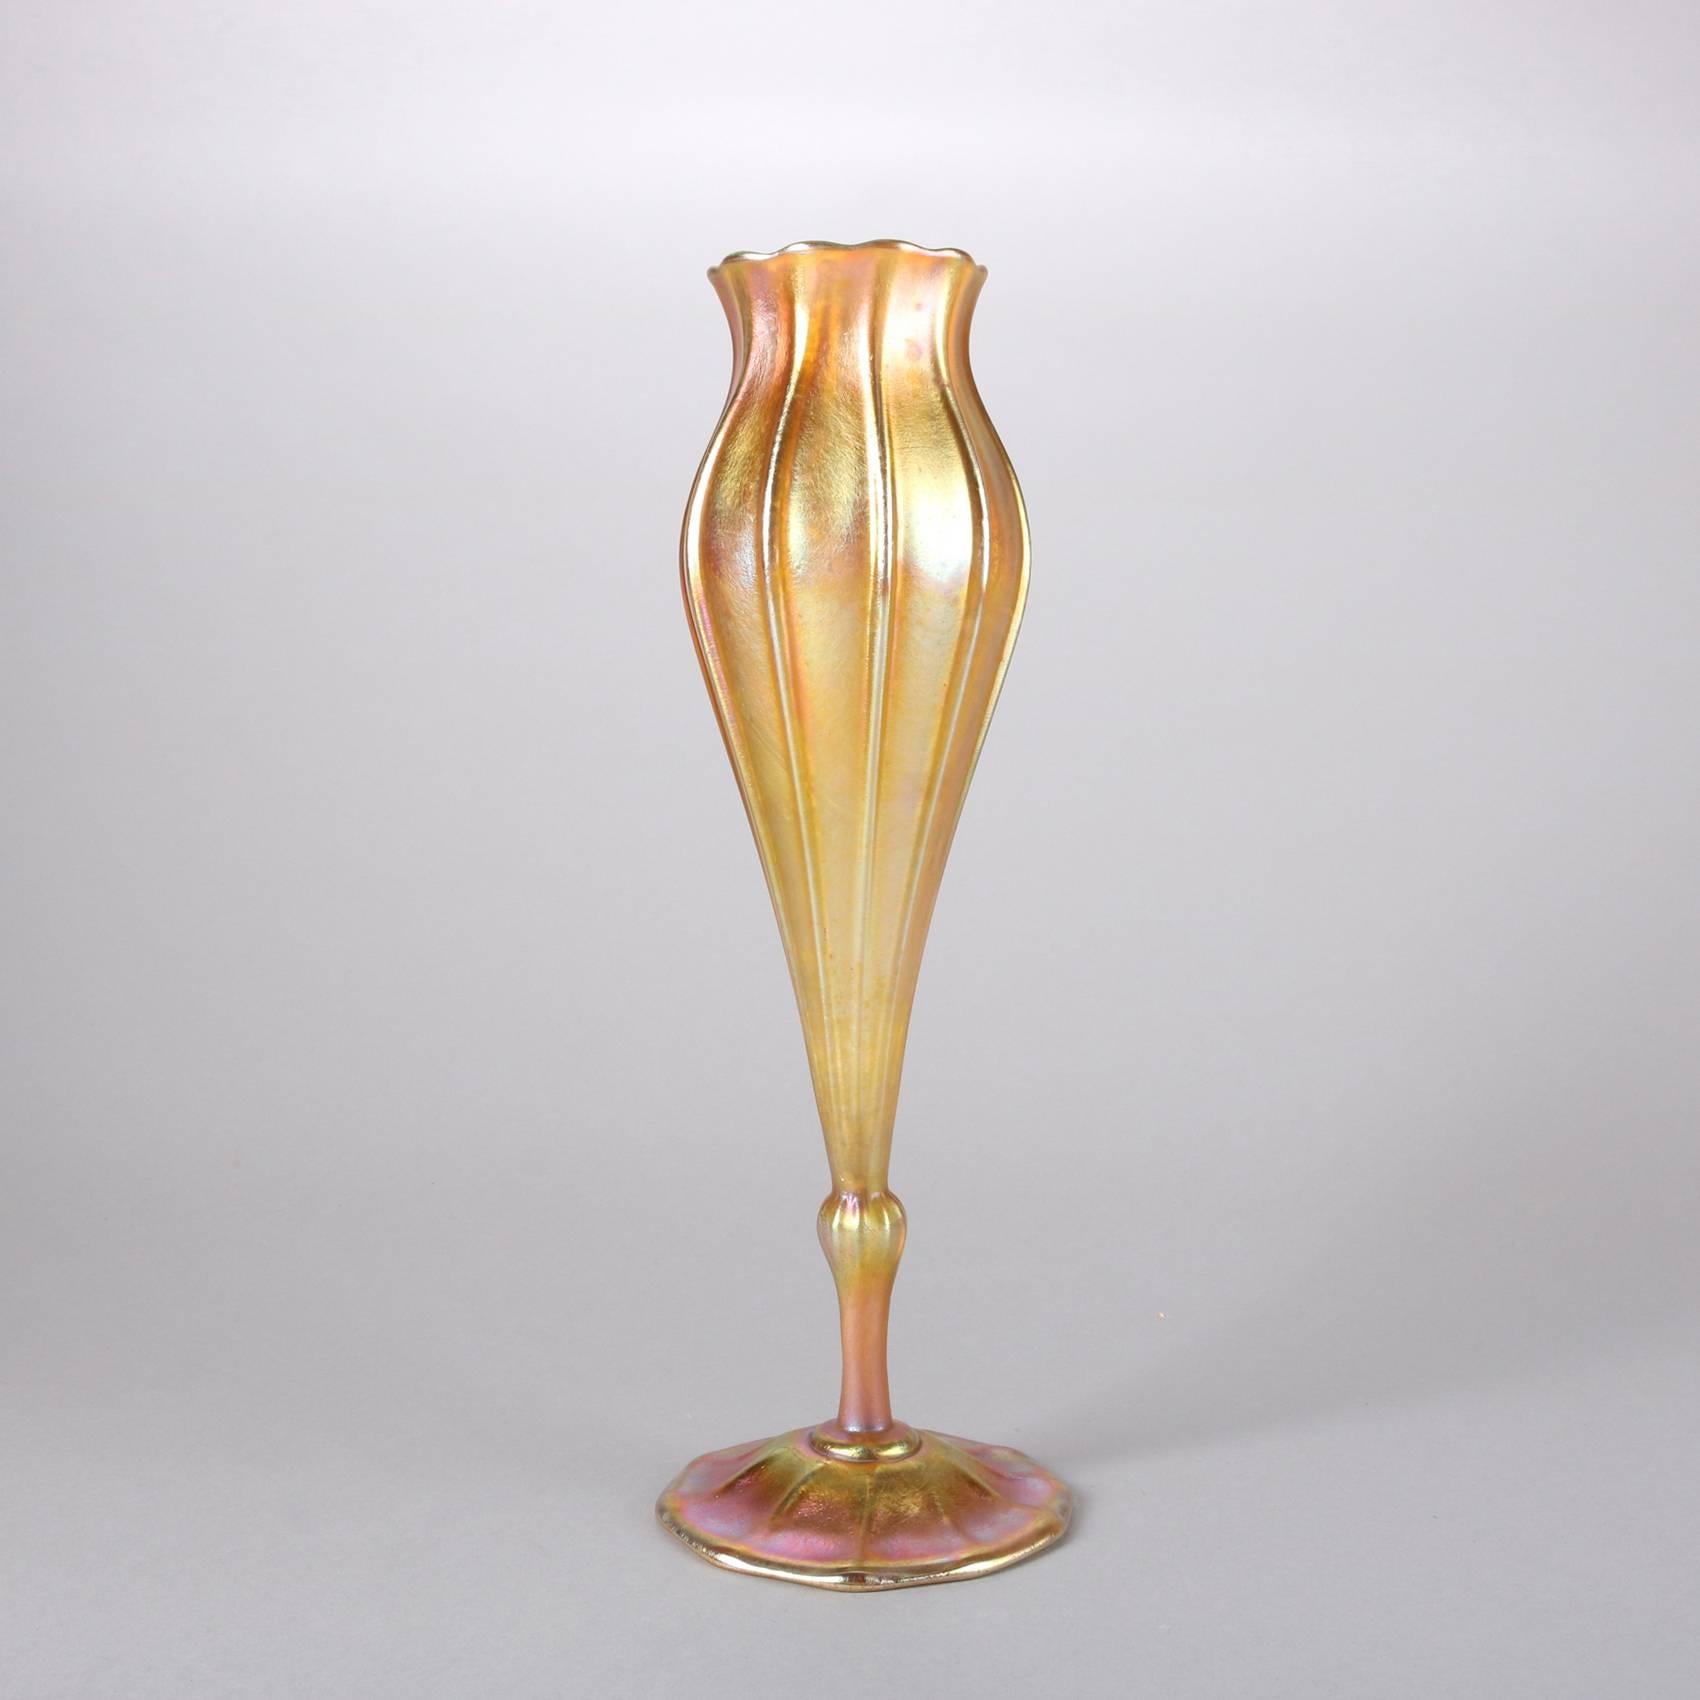 Antique Favrile art glass flora form tulip vase by Louis Comfort Tiffany, signed "5351 J. L.C. Tiffany Favrile" on base, 20th century.

Measures: 11.75" height x 4" diameter.